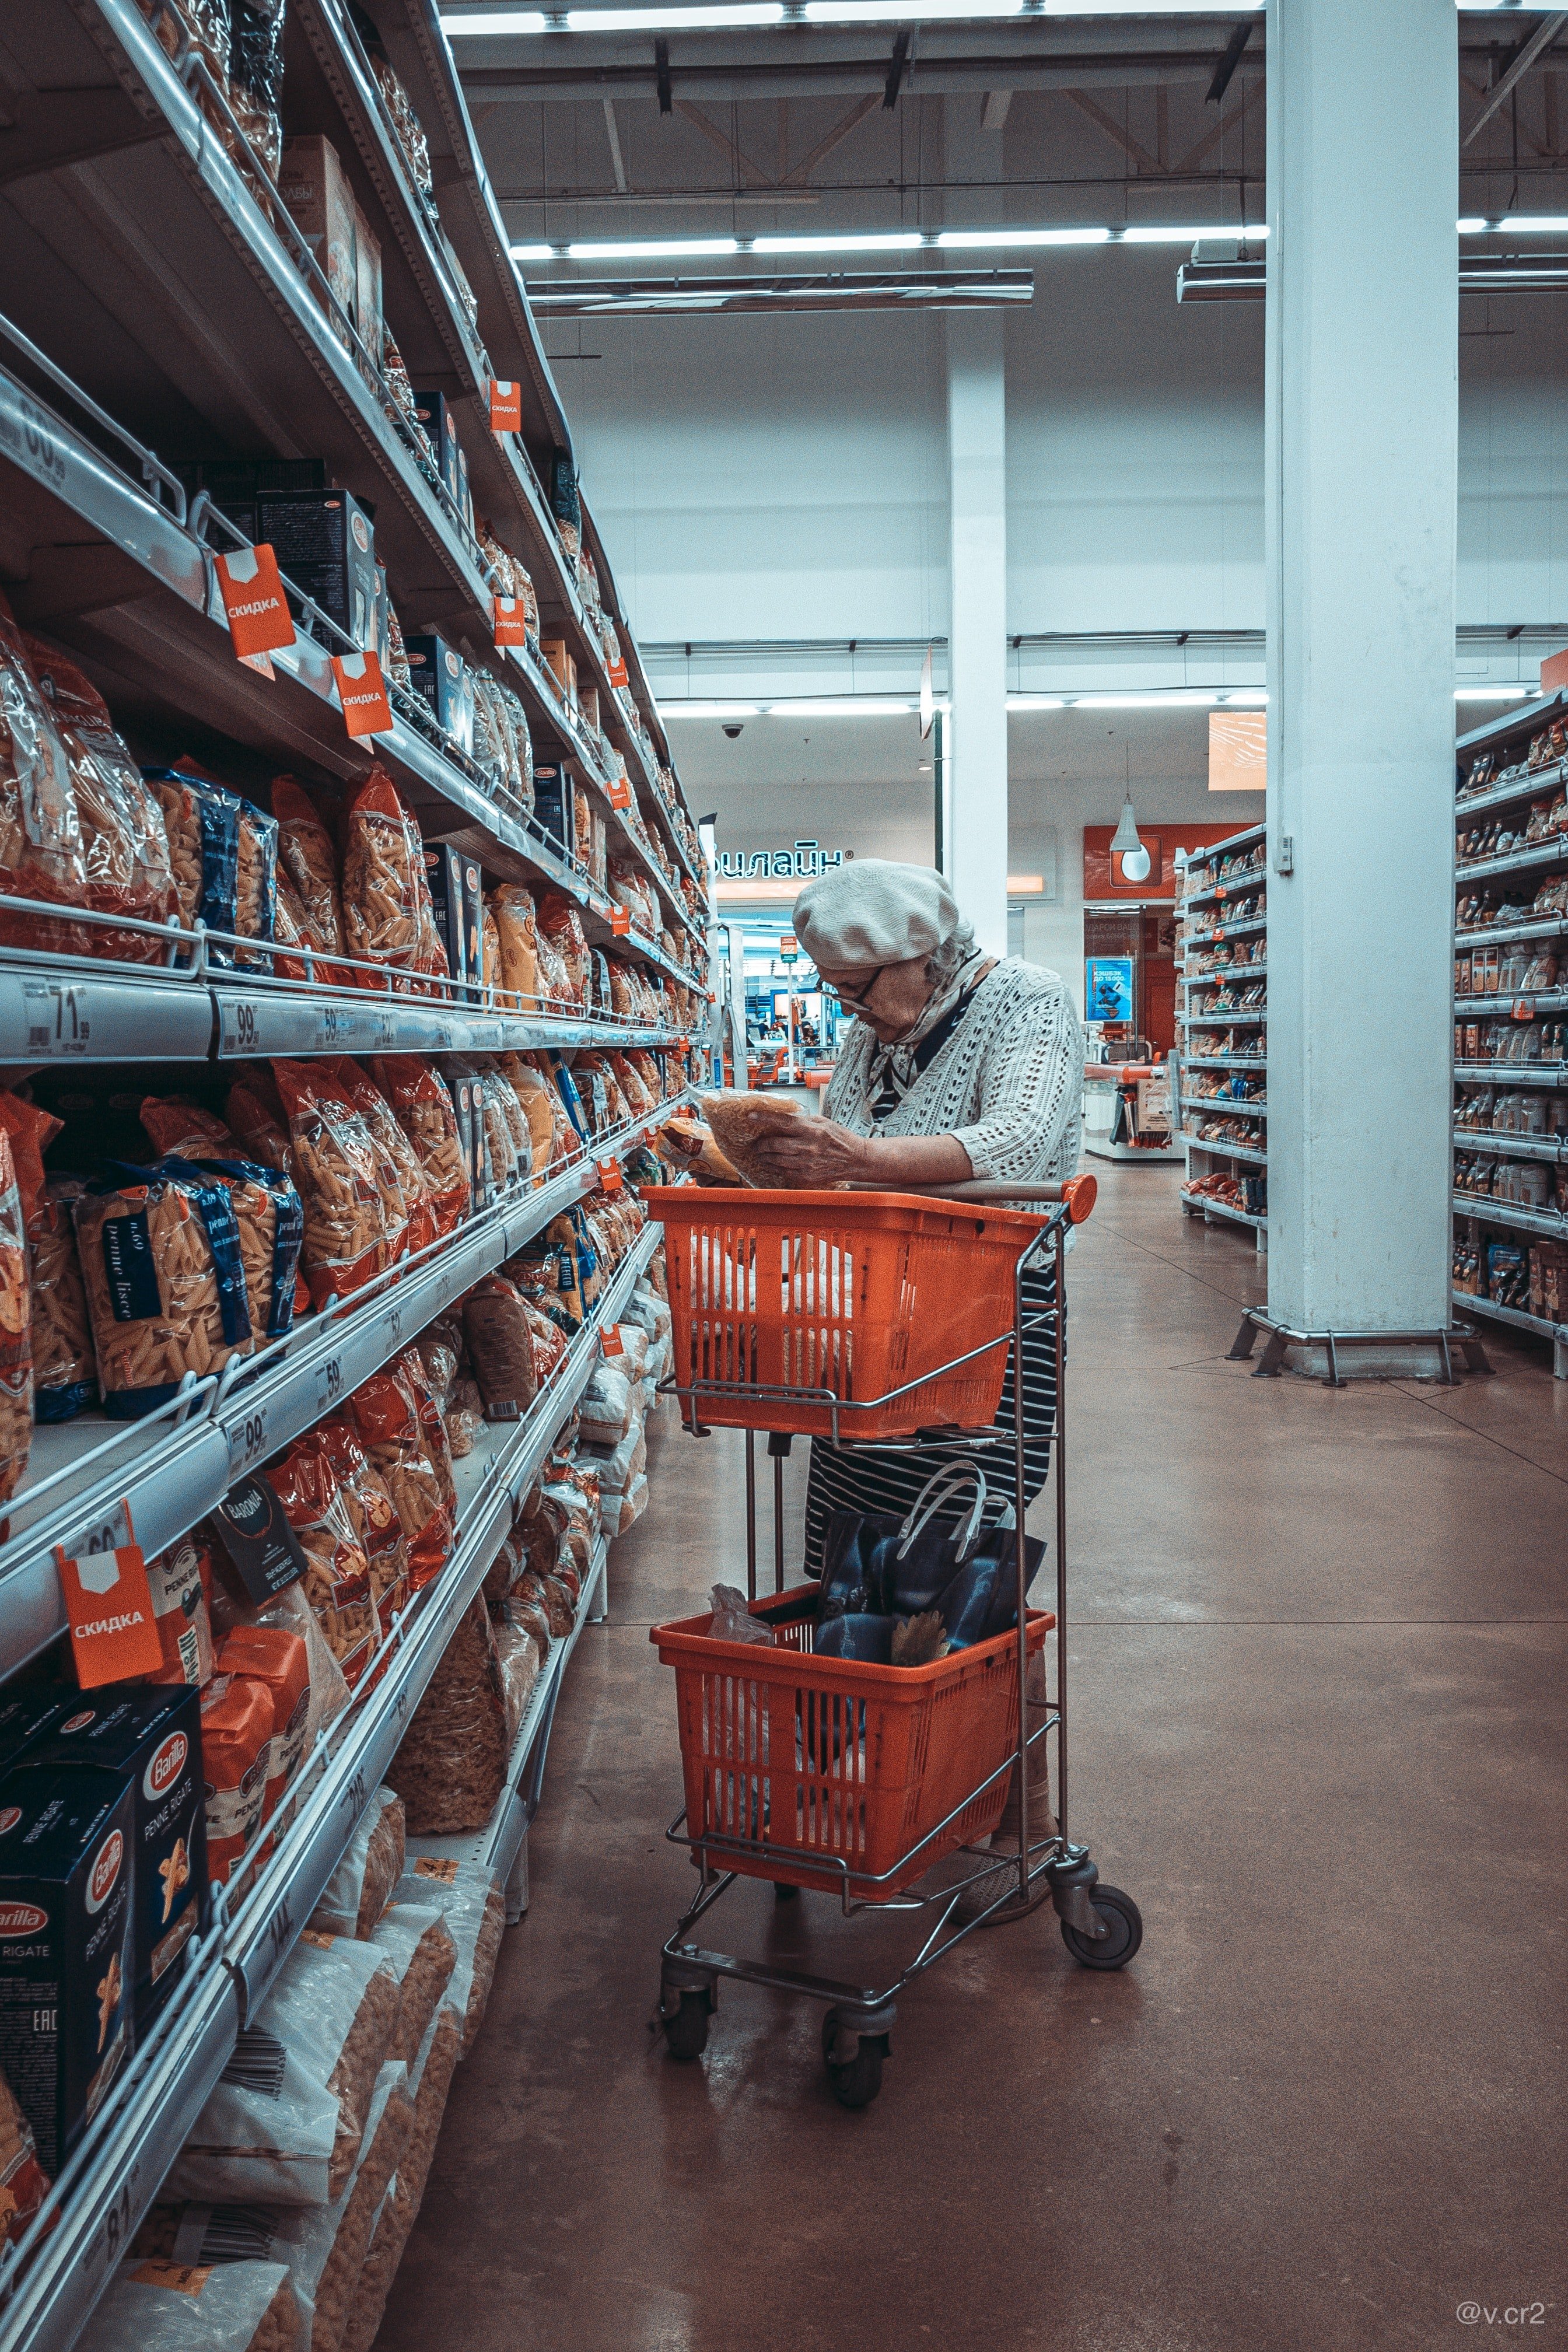 Agnes had to go shopping all on her own. | Source: Unsplash